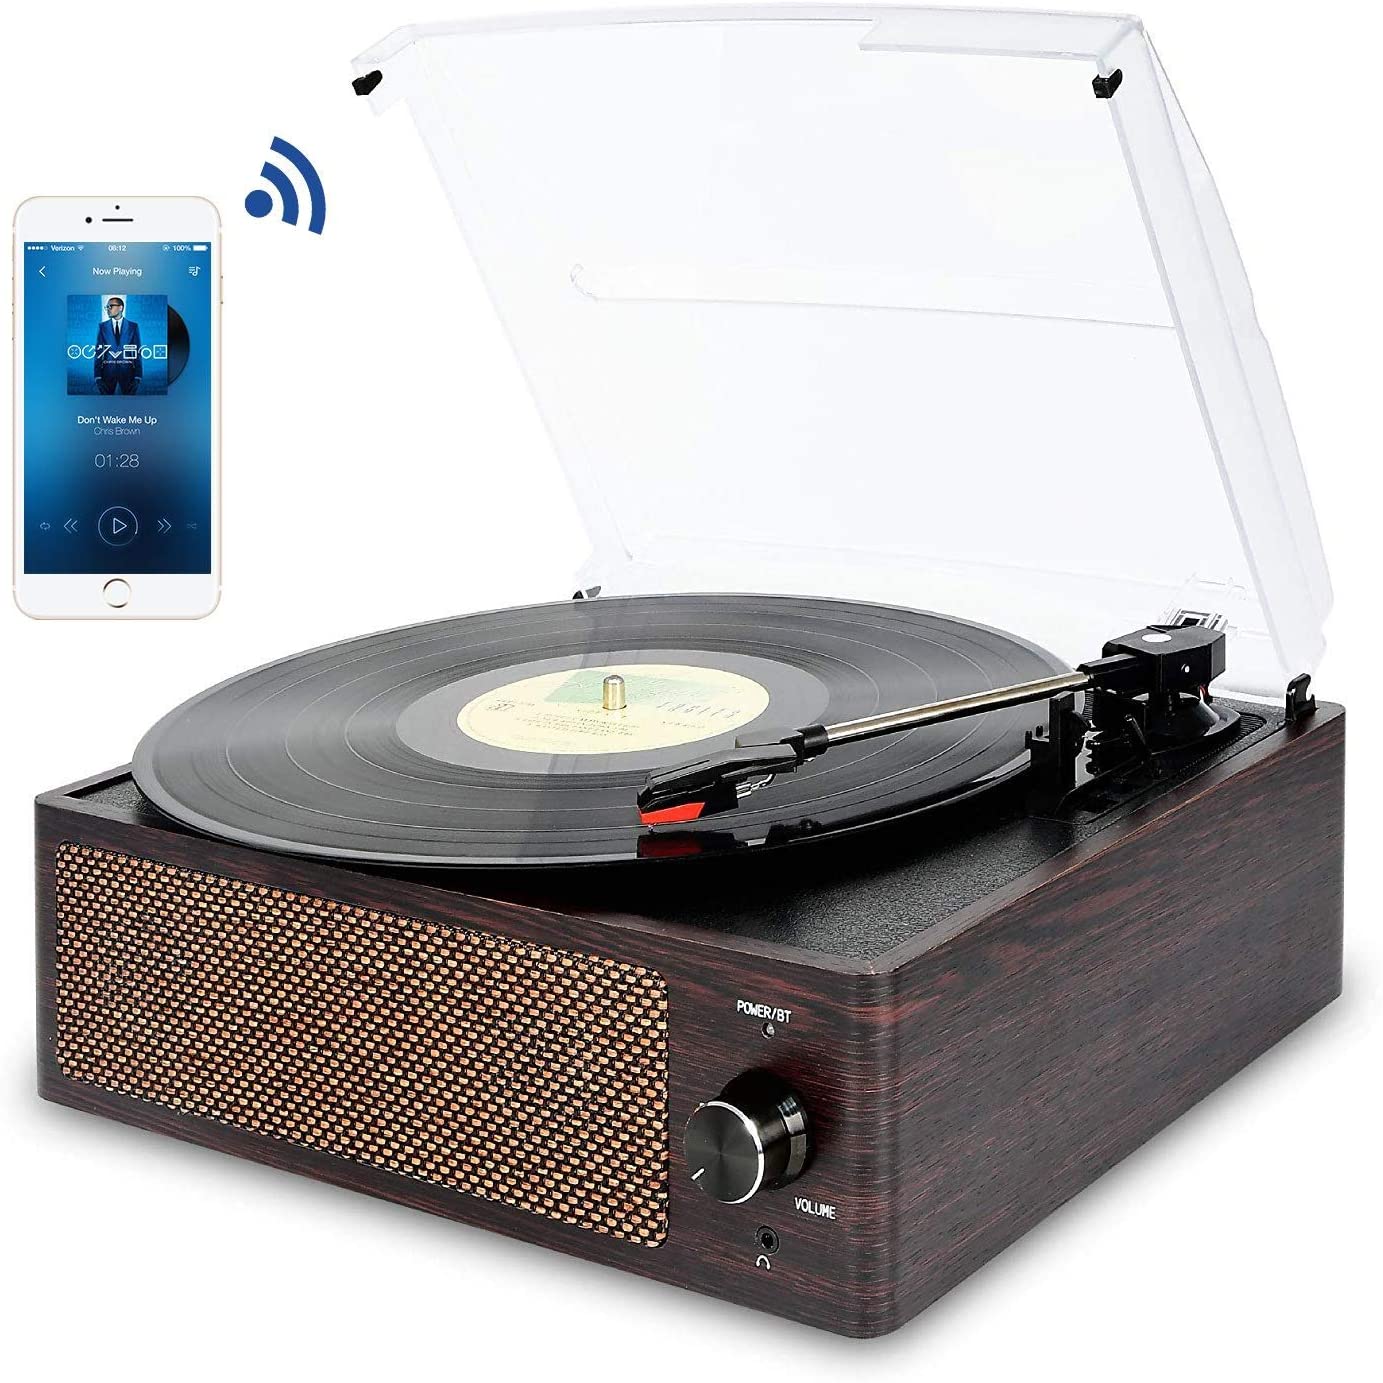 DIGITNOW Bluetooth Record Player Belt-Driven 3-Speed Turntable, Vintage Vinyl Record Players Built-in Stereo Speakers, with Headphone Jack/ Aux Input/ RCA Line Out, Brown Wooden